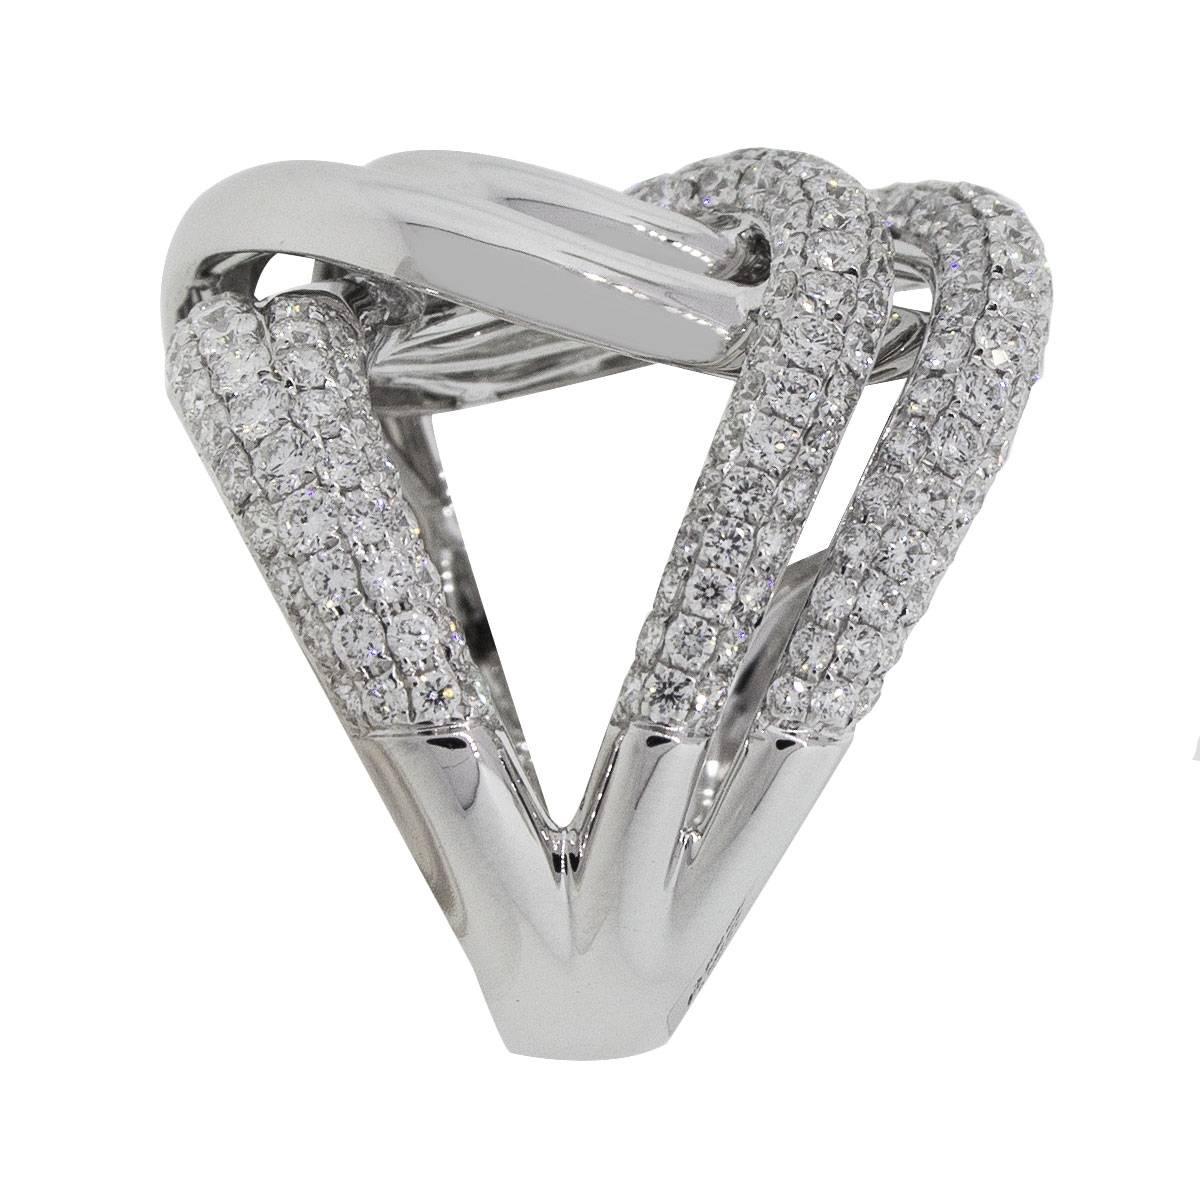 Material: 18k white gold
Diamond Details: Approximately 2.57ctw of round brilliant diamonds. Diamonds are G/H in color and VS in clarity.
Size: 6.5
Total Weight: 15.4g (9.9dwt)
Measurements: 1″ x 0.80″ x 1″
Additional Details: This item comes with a